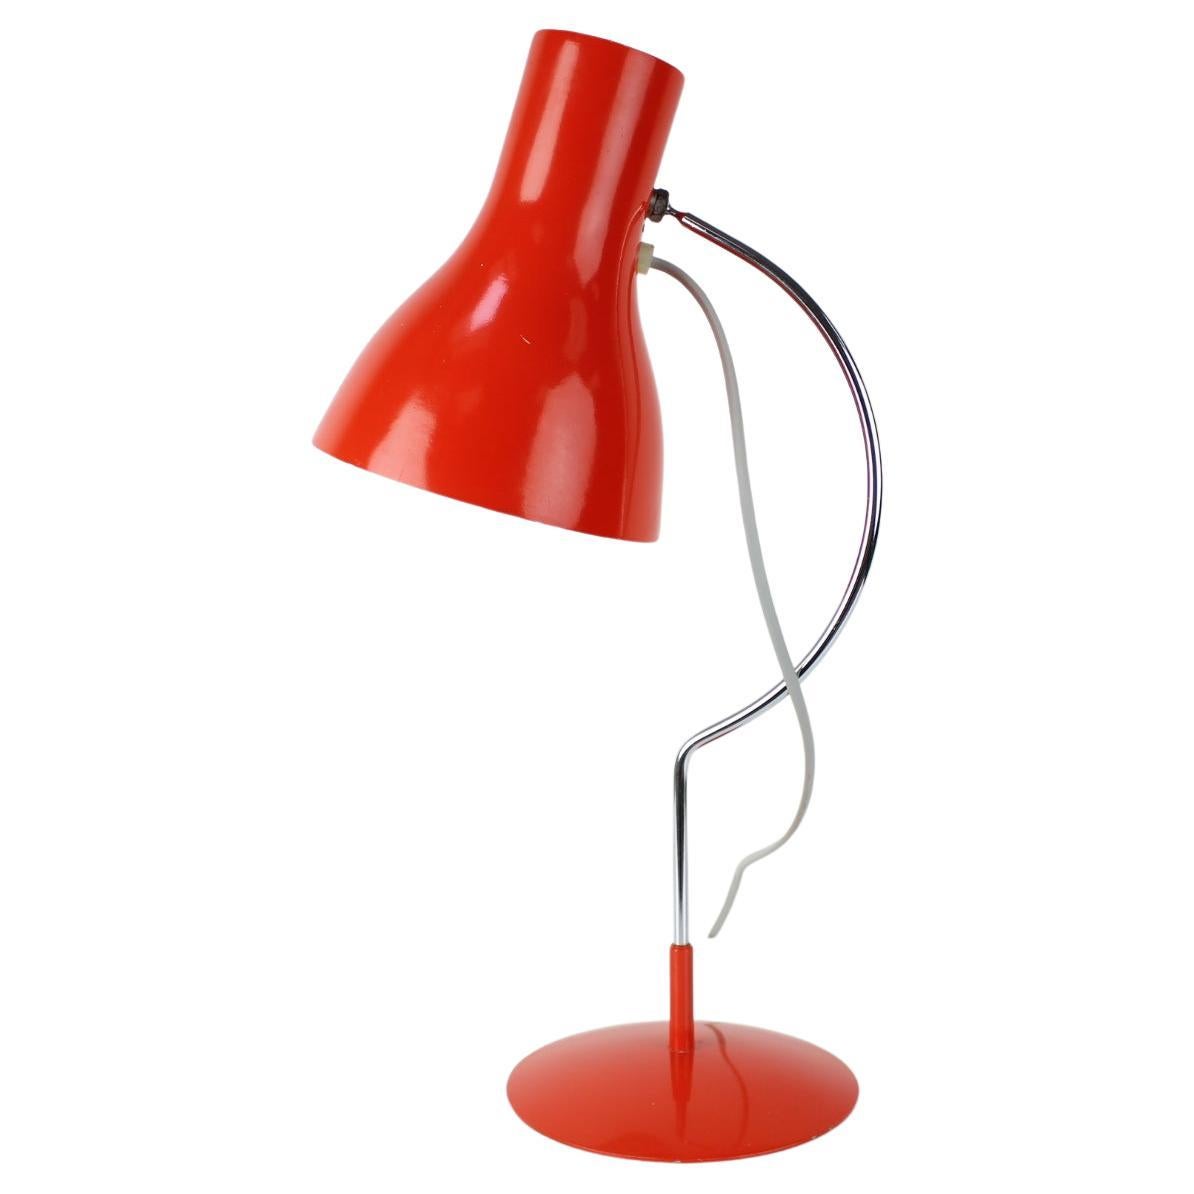 Midcentury Red Table Lamp/Napako Designed by Josef Hurka, 1970s